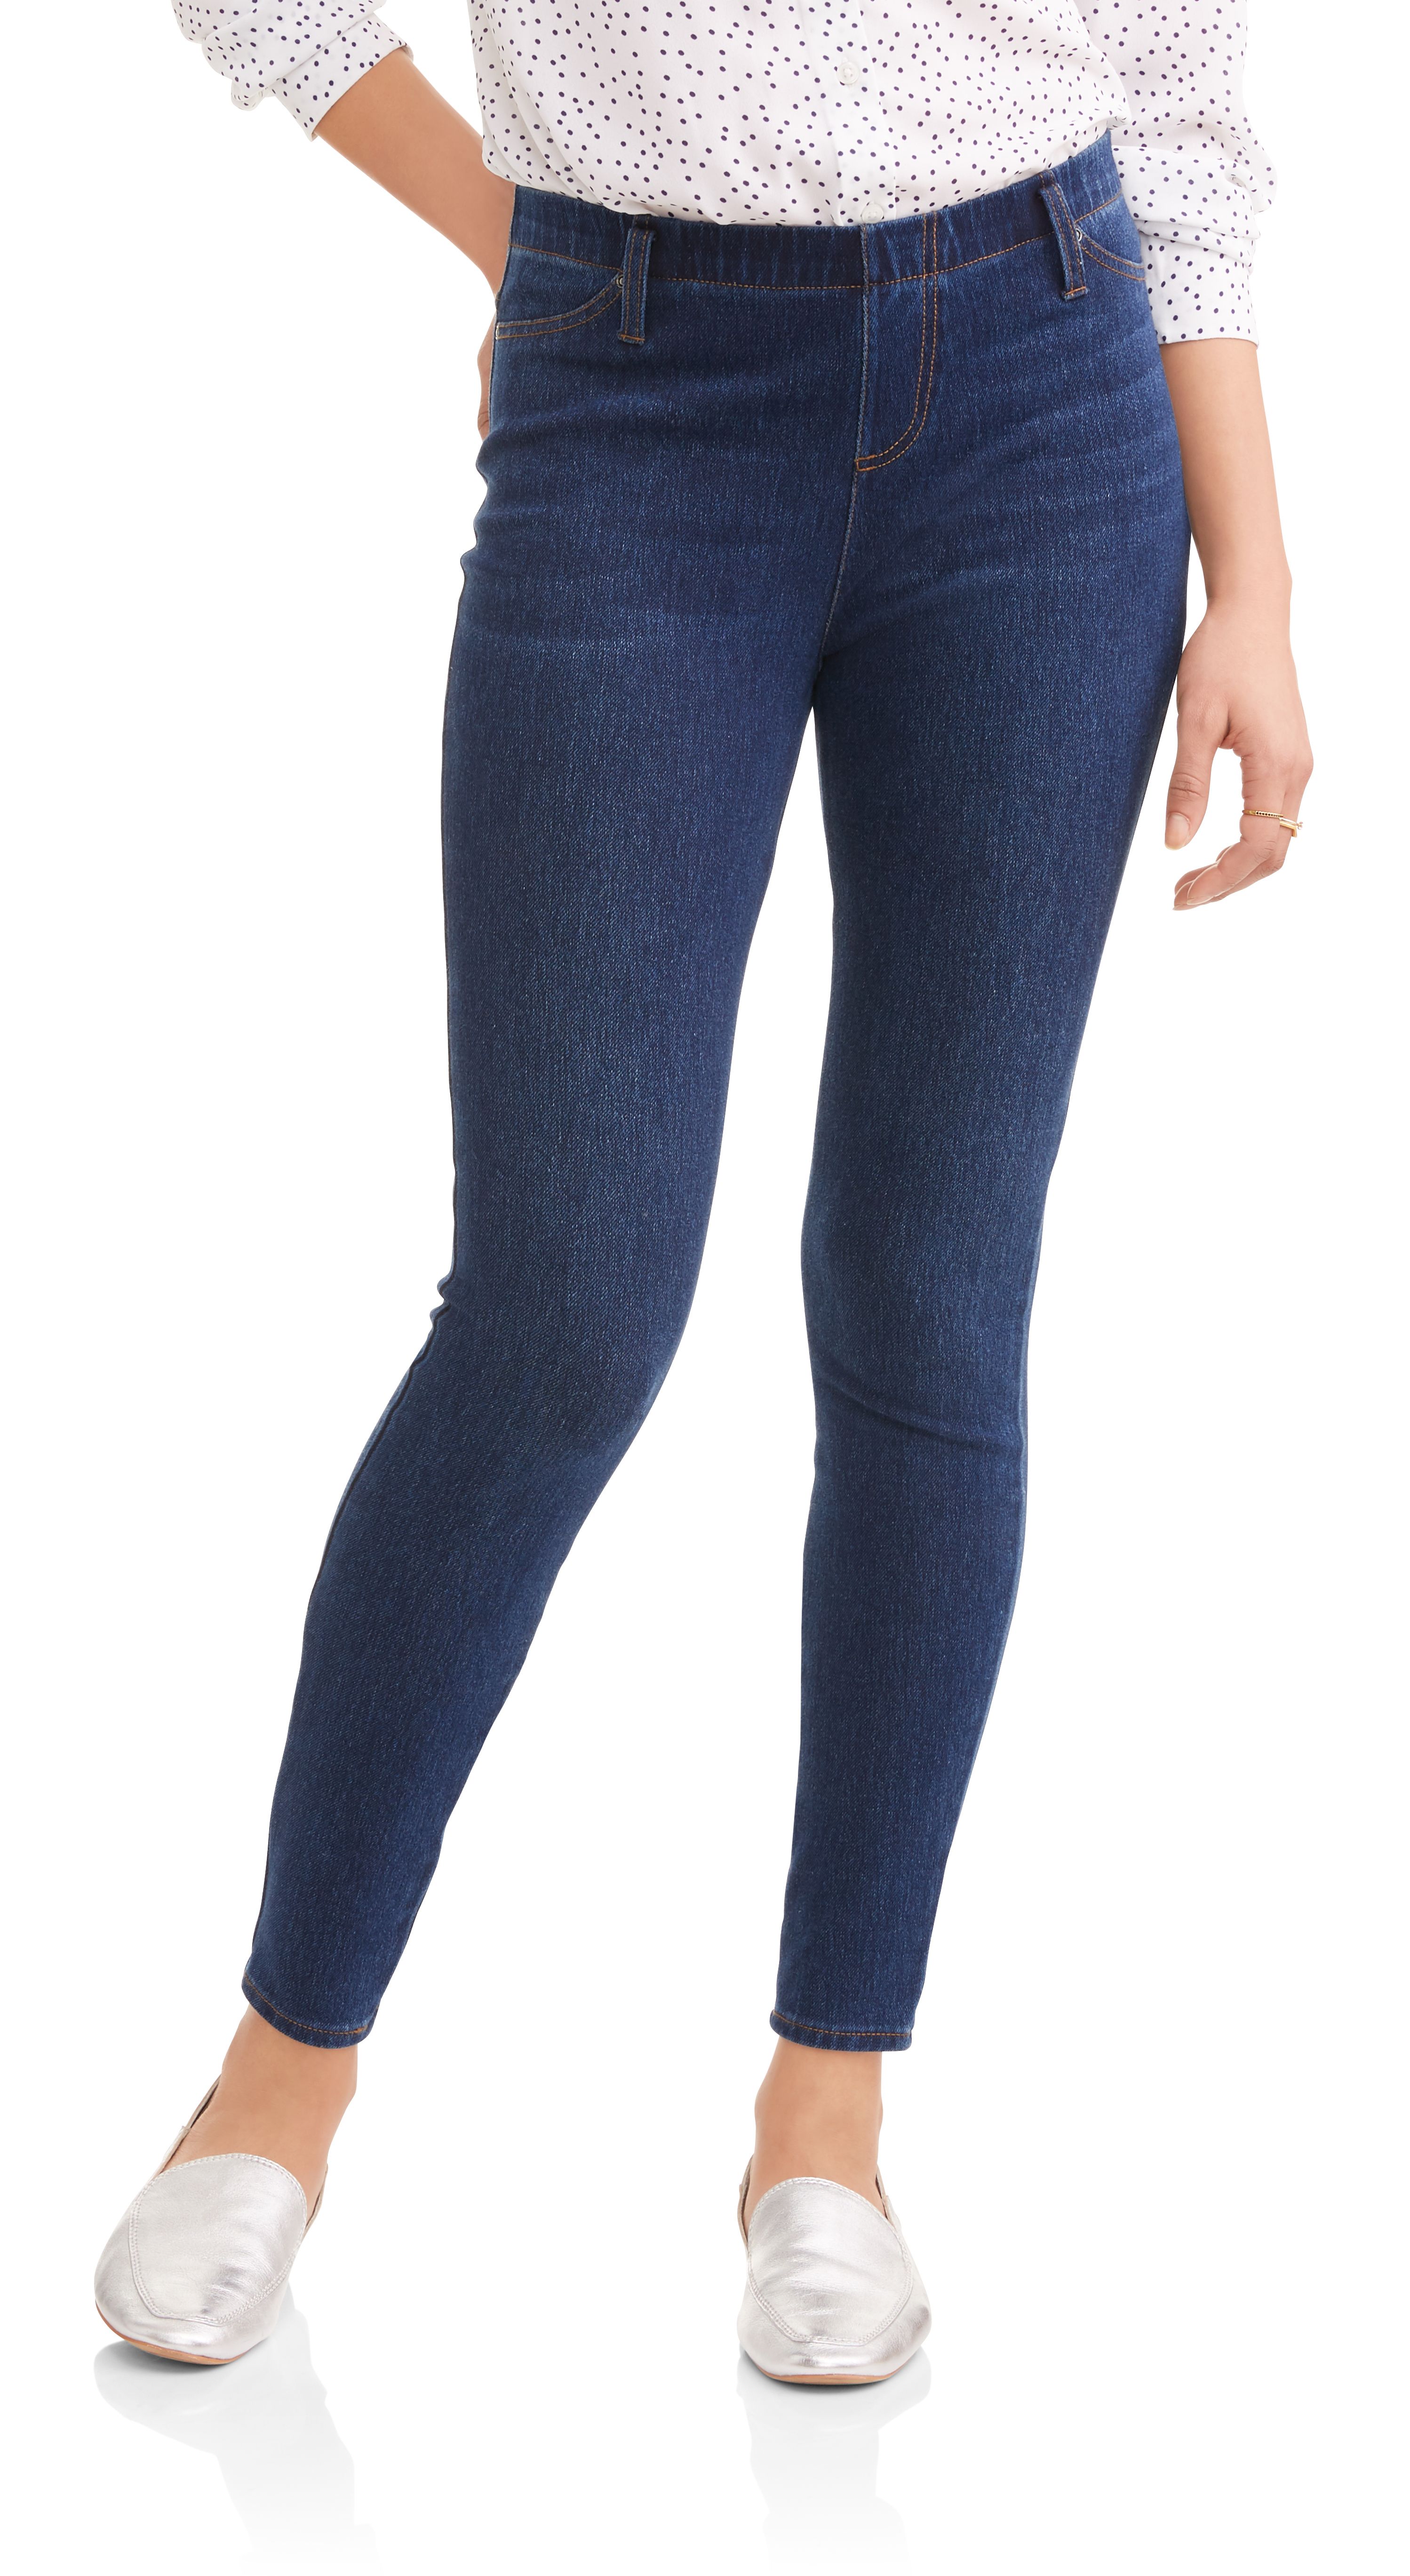 Time and Tru Women's Full Length Soft Knit Color Jeggings - image 5 of 5